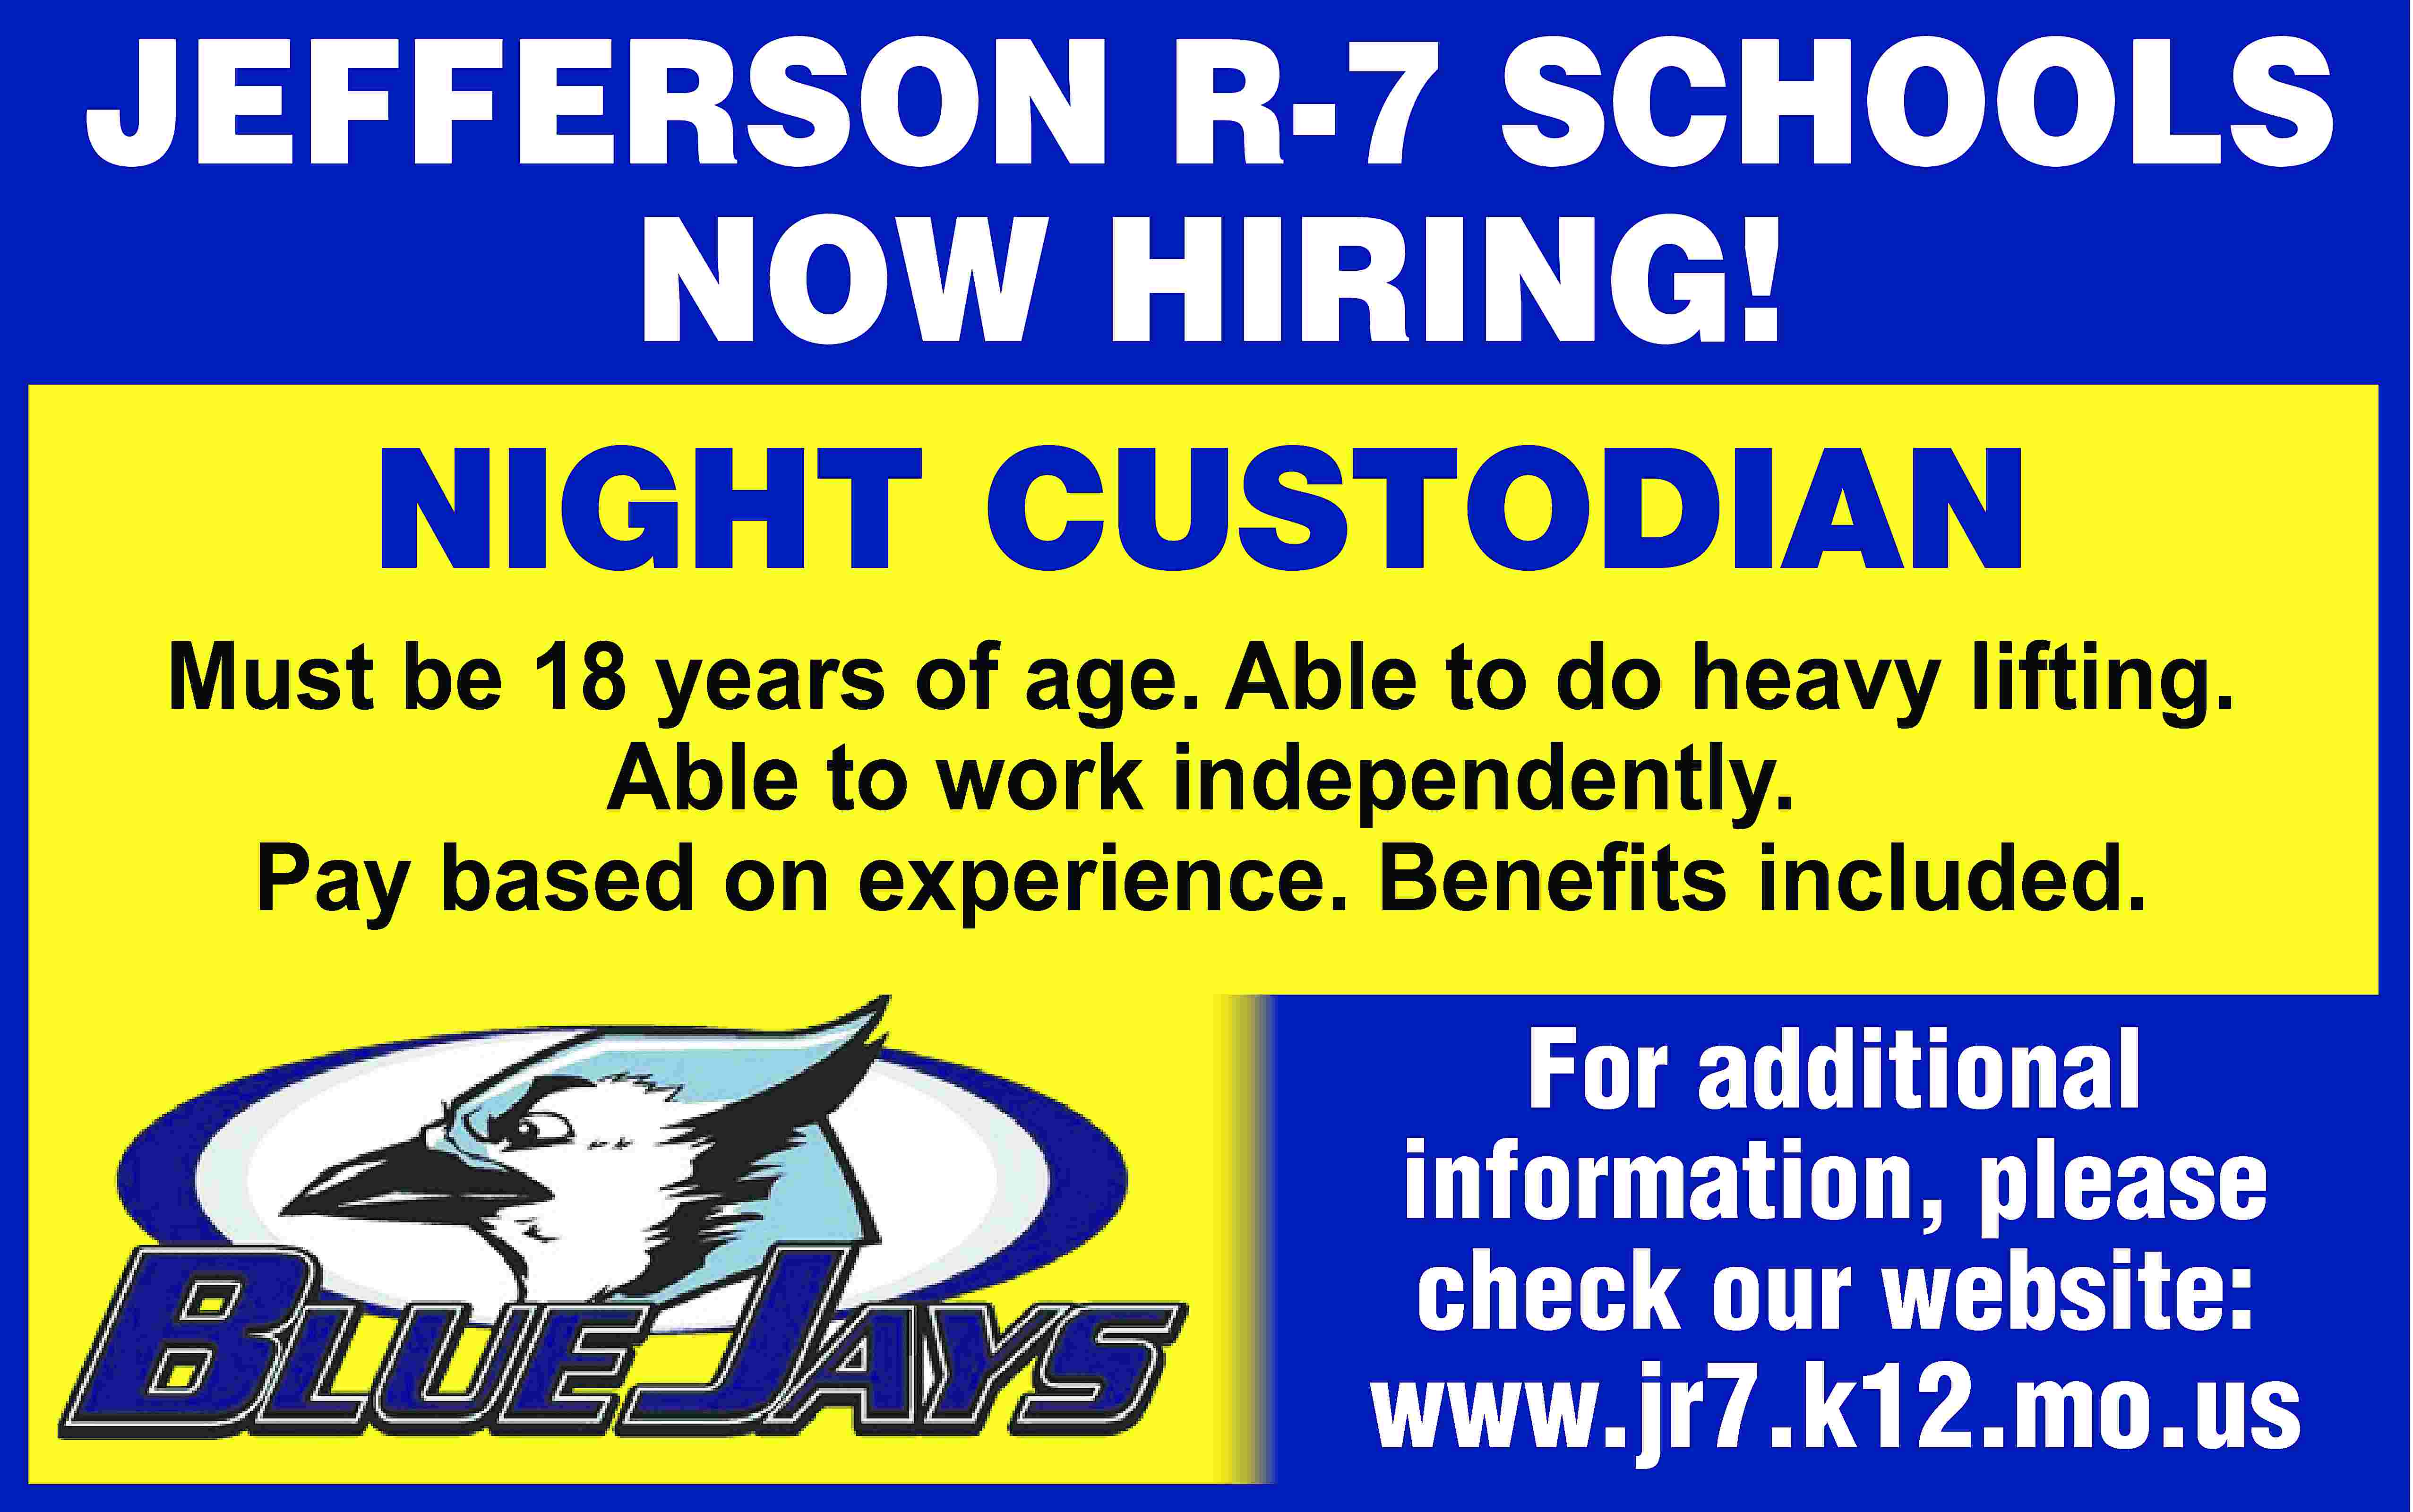 JEFFERSON R-7 SCHOOLS NOW HIRING!  JEFFERSON R-7 SCHOOLS NOW HIRING! NIGHT CUSTODIAN Must be 18 years of age. Able to do heavy lifting. Able to work independently. Pay based on experience. Beneﬁts included. For additional information, please check our website: www.jr7.k12.mo.us